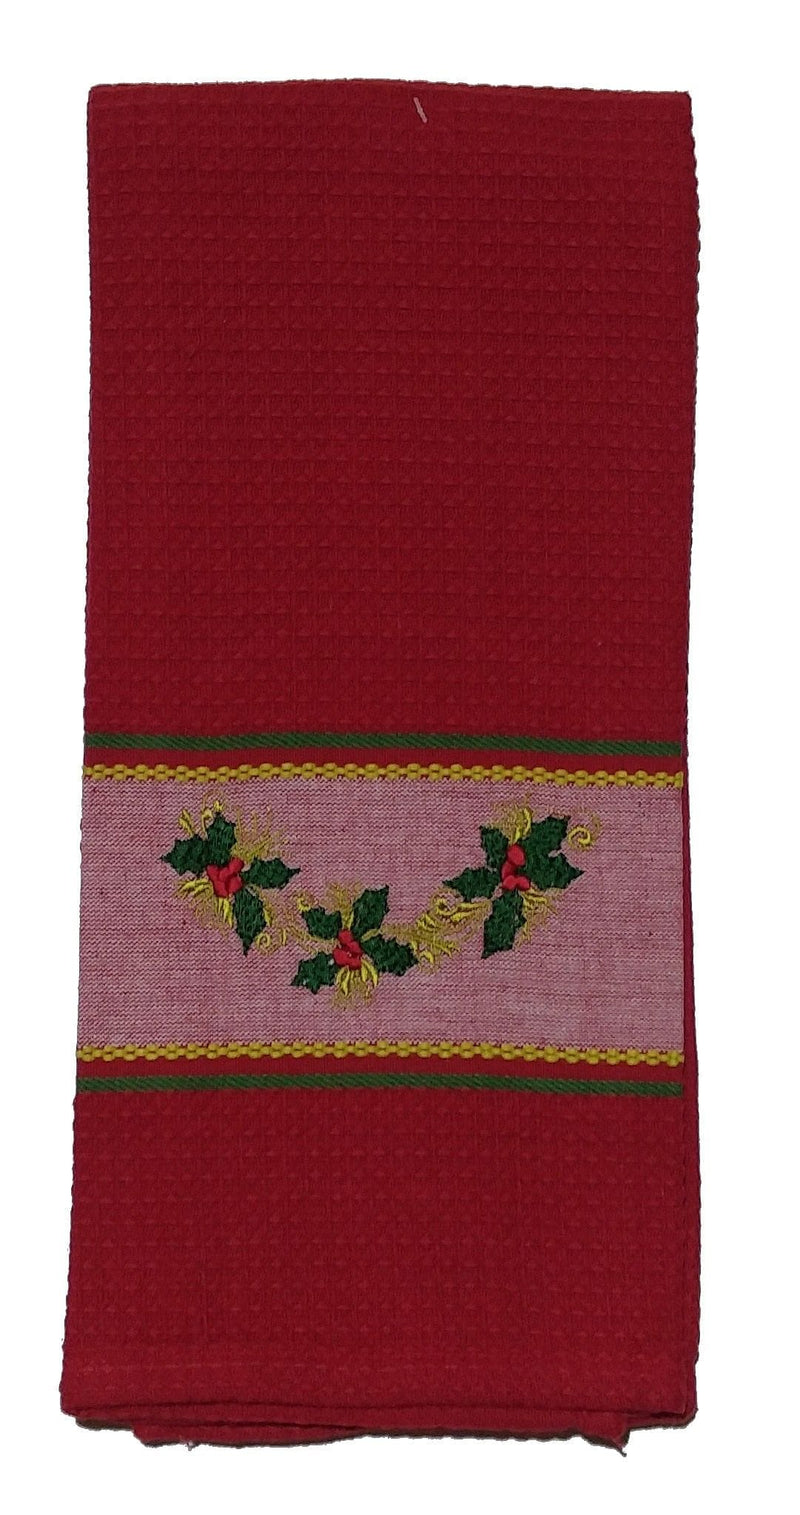 Embroidered Yuletide Kitchen Towel - Red - Shelburne Country Store